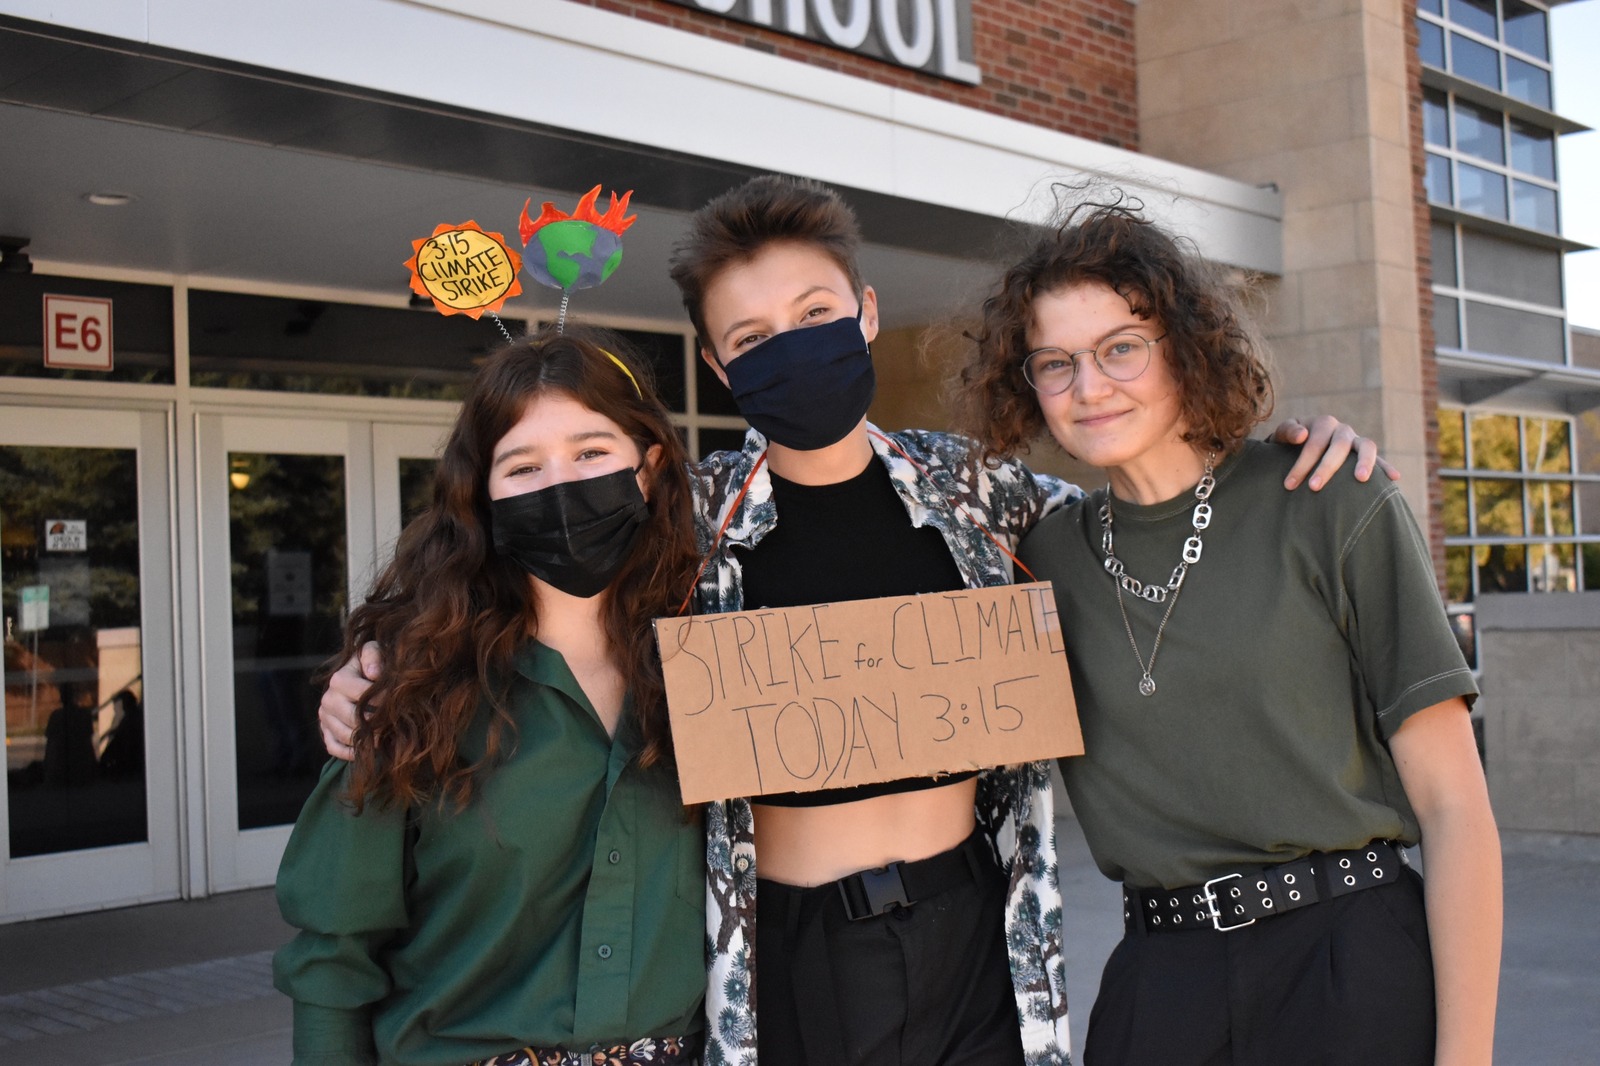 Climate activist Lily Morse is flanked by Ellie Cornish on the left and Cady Diamond on the right. Photo courtesy Lily Smith of Hawk Talk